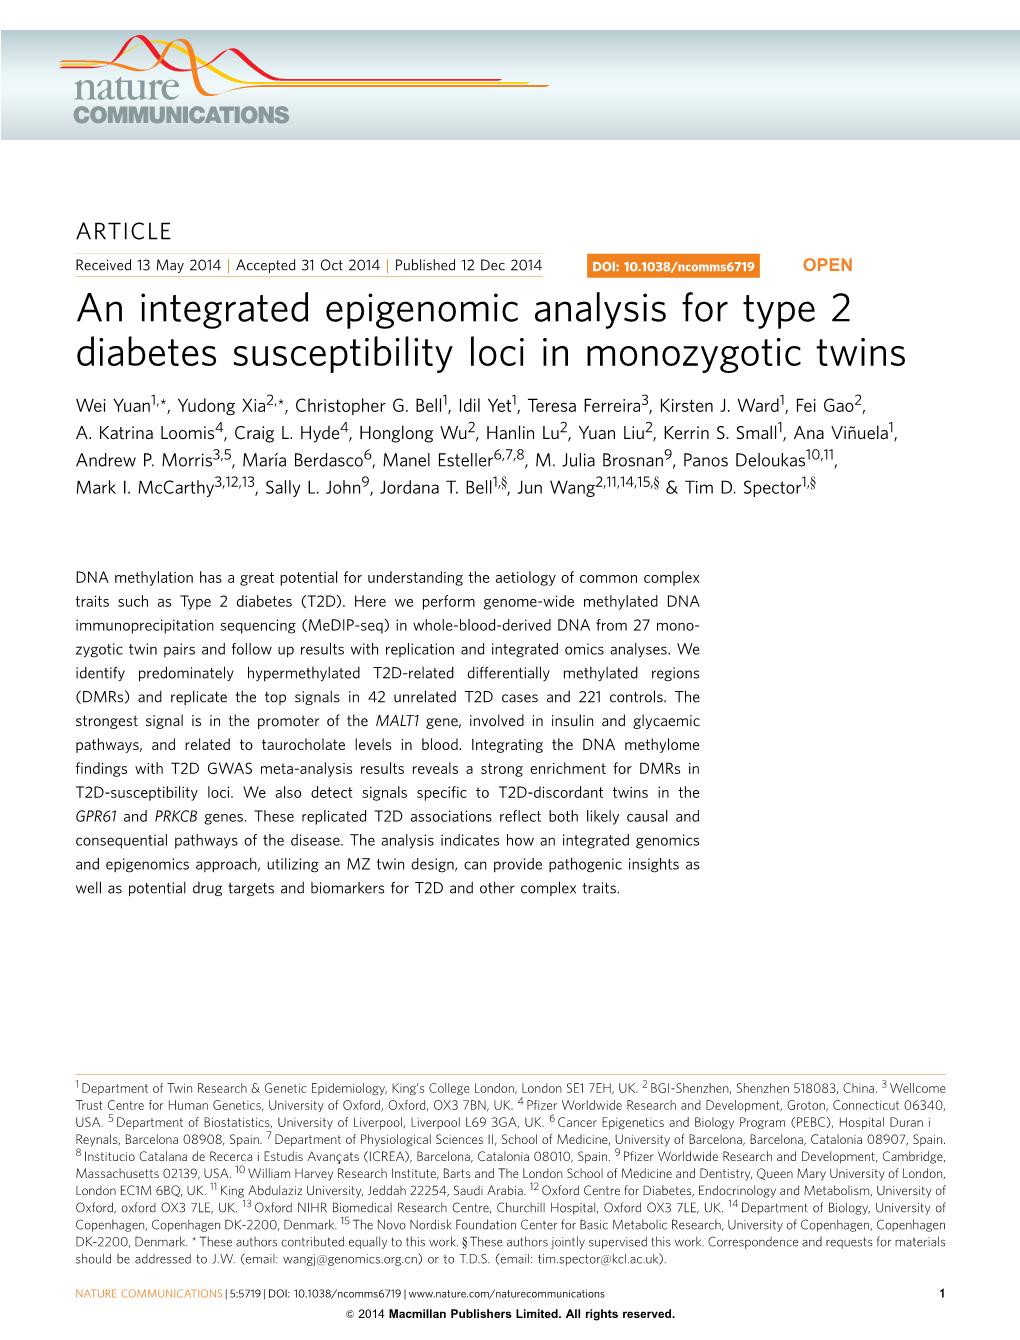 An Integrated Epigenomic Analysis for Type 2 Diabetes Susceptibility Loci in Monozygotic Twins